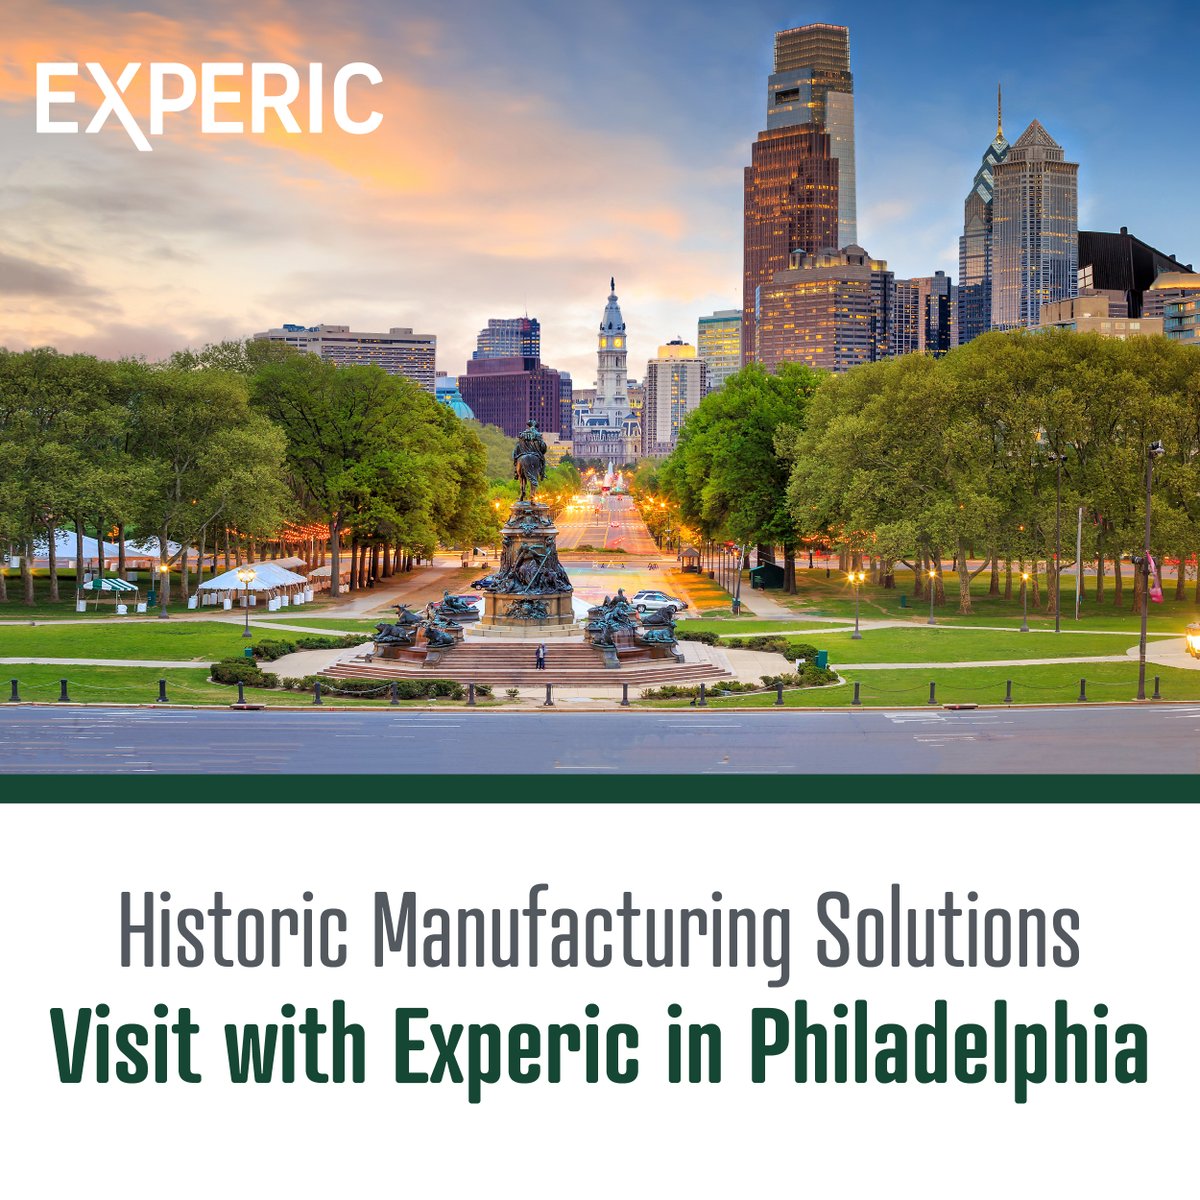 What are your biggest manufacturing challenges? Our blending, filling, and device assembly experts are ready to talk optimization. Schedule a meeting at CPHI to hear how Experic helps you rest easy. ow.ly/PK6R50Nv4rz

#CPHI2023